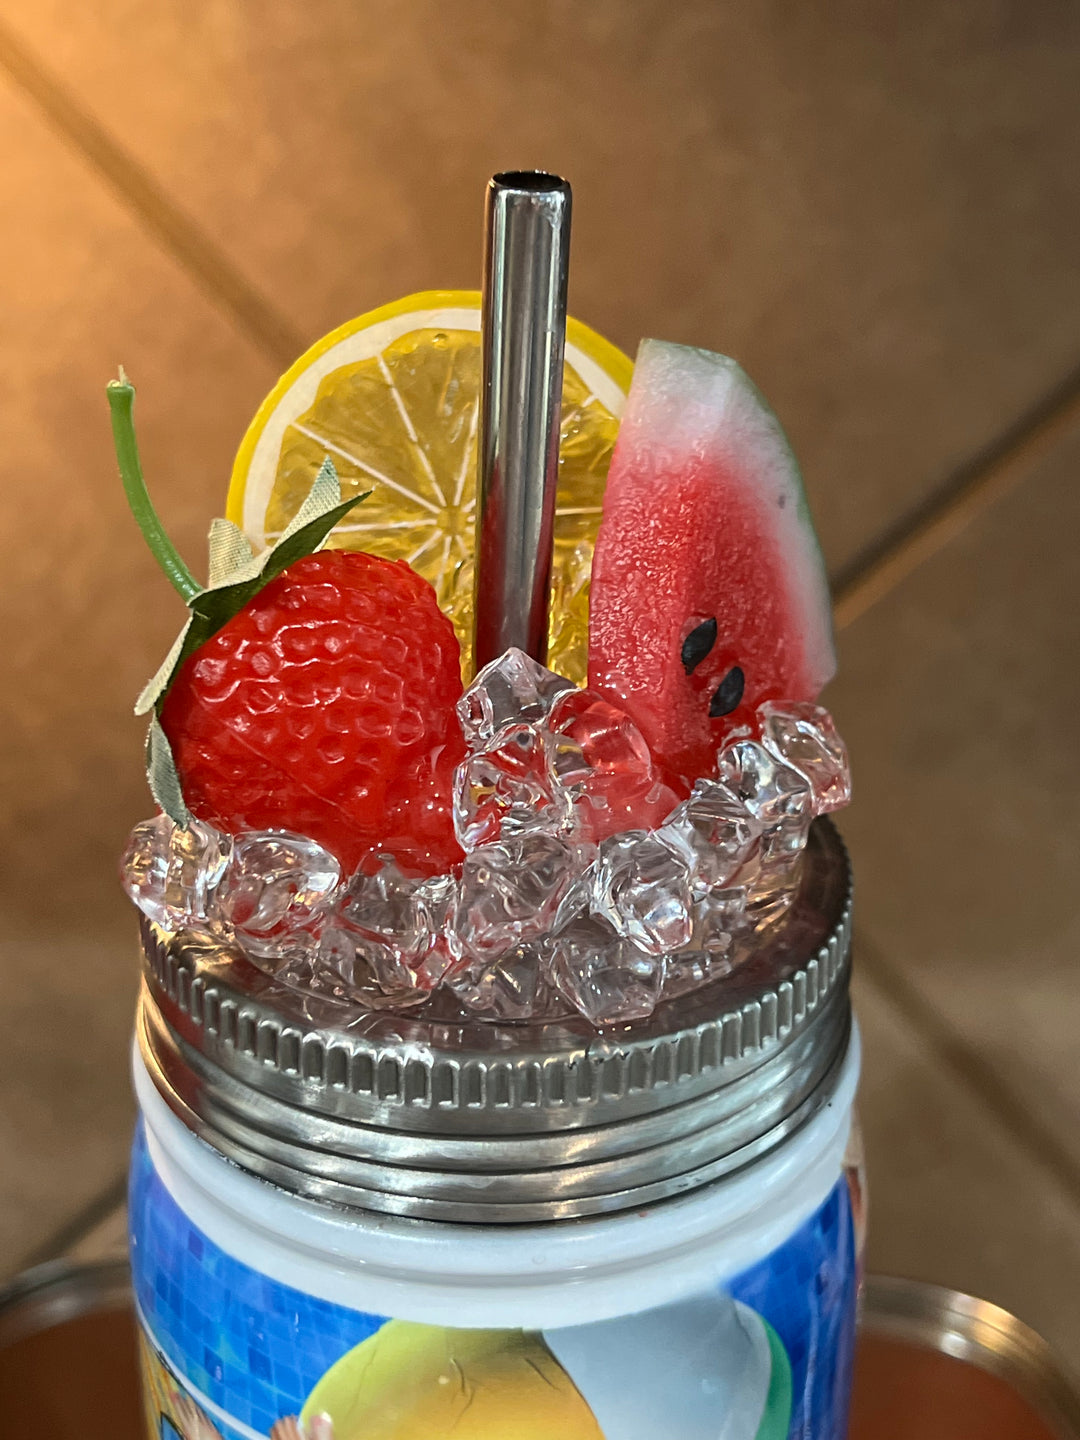 Strawberry + Lemon + Watermelon - Fruit Tumbler Toppers - Decorative Lid for Tumblers - Ice Topper Lid